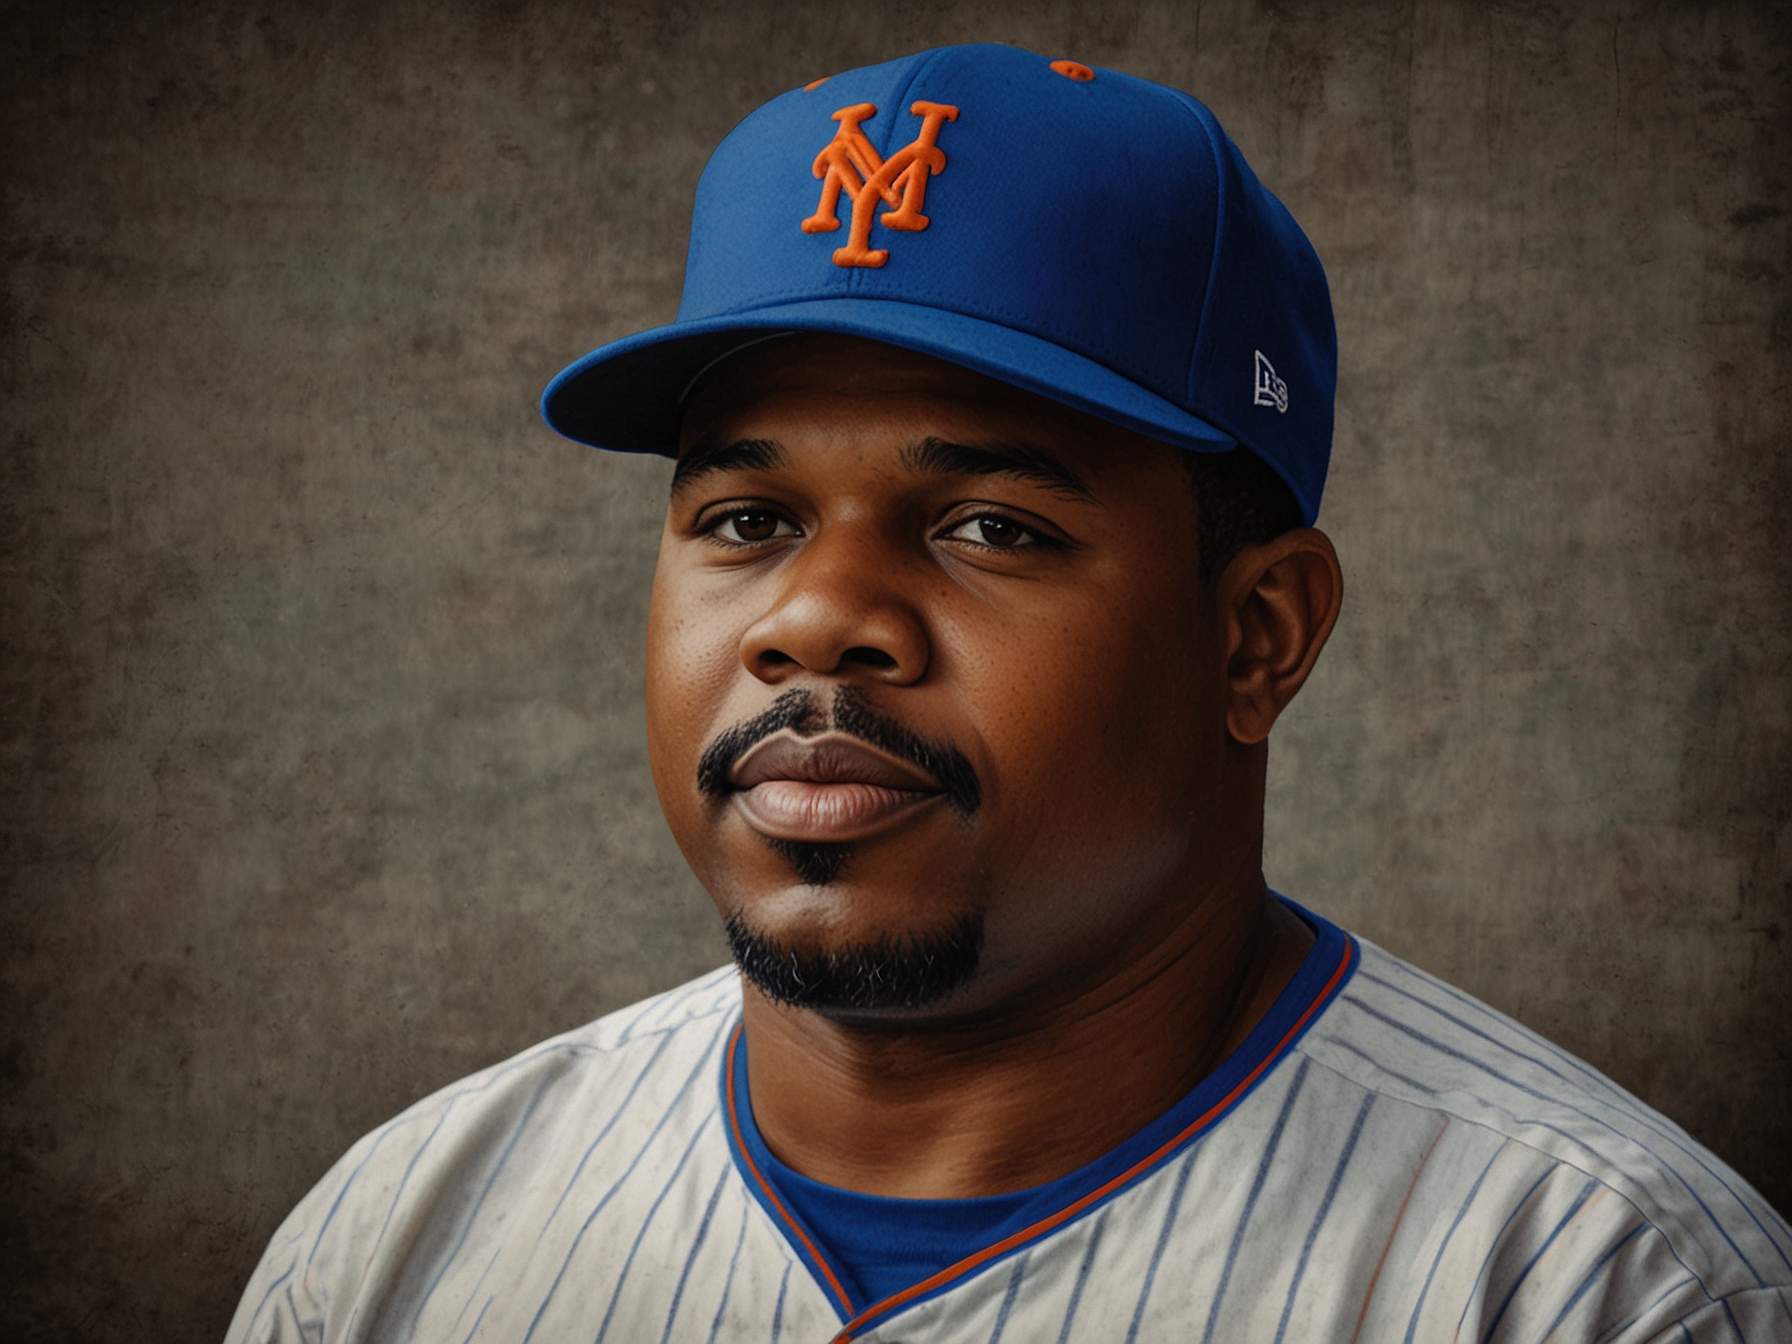 An image of Bobby Bonilla in his New York Mets uniform, symbolizing his long-lasting financial legacy through his unique contract agreement that pays him annually until 2035.